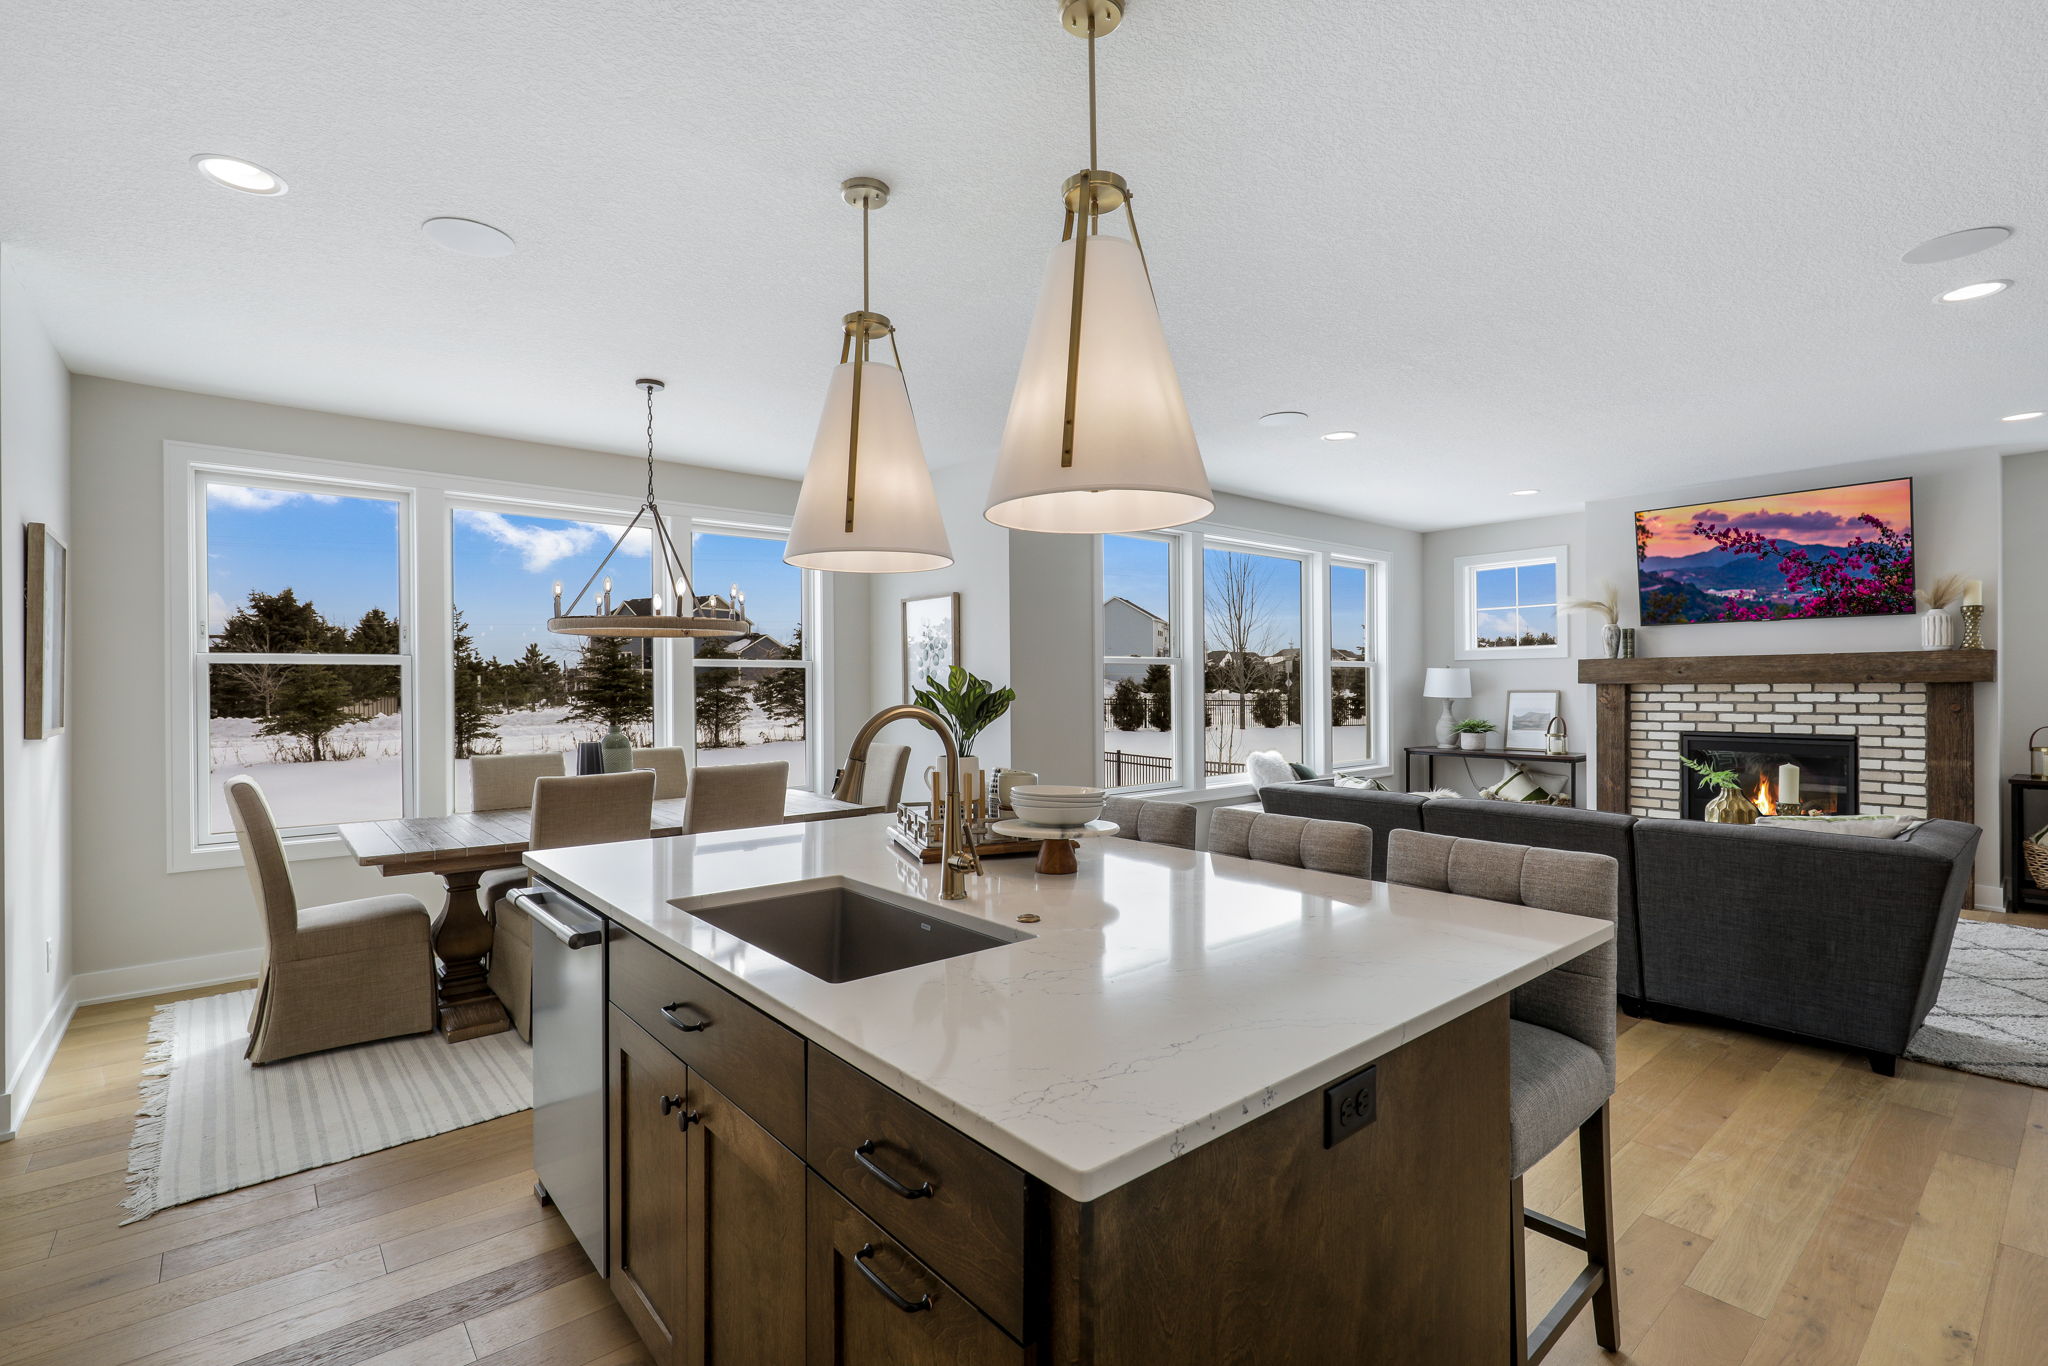 4985-sunflower-place-woodbury-mn-kitchen-island-and-living-room